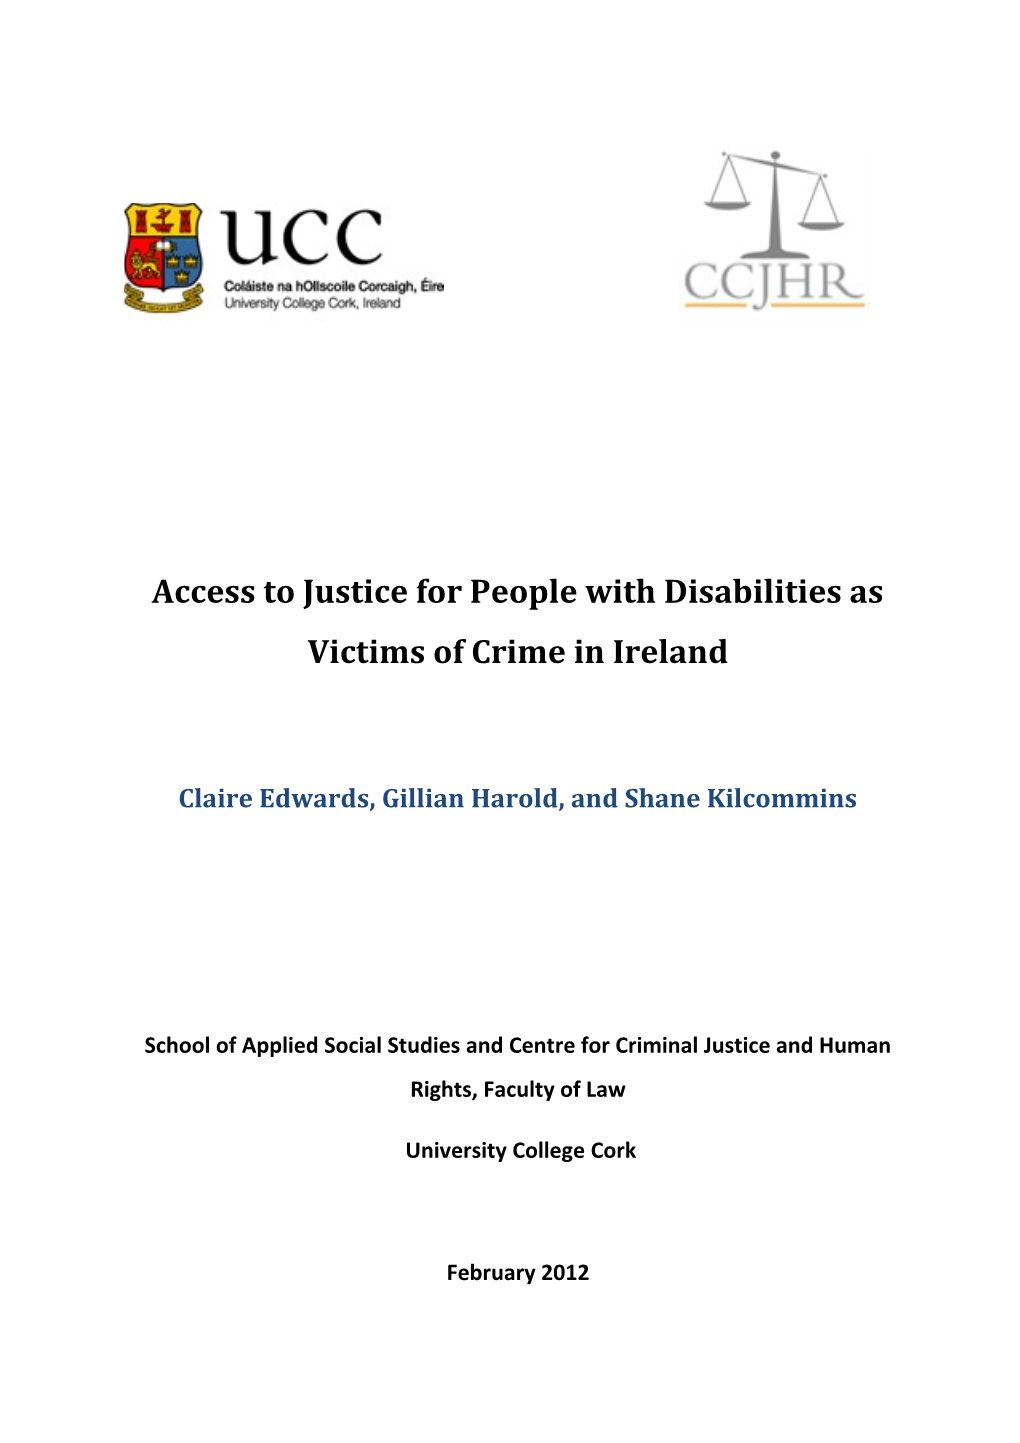 Access to Justice for People with Disabilities As Victims of Crime in Ireland